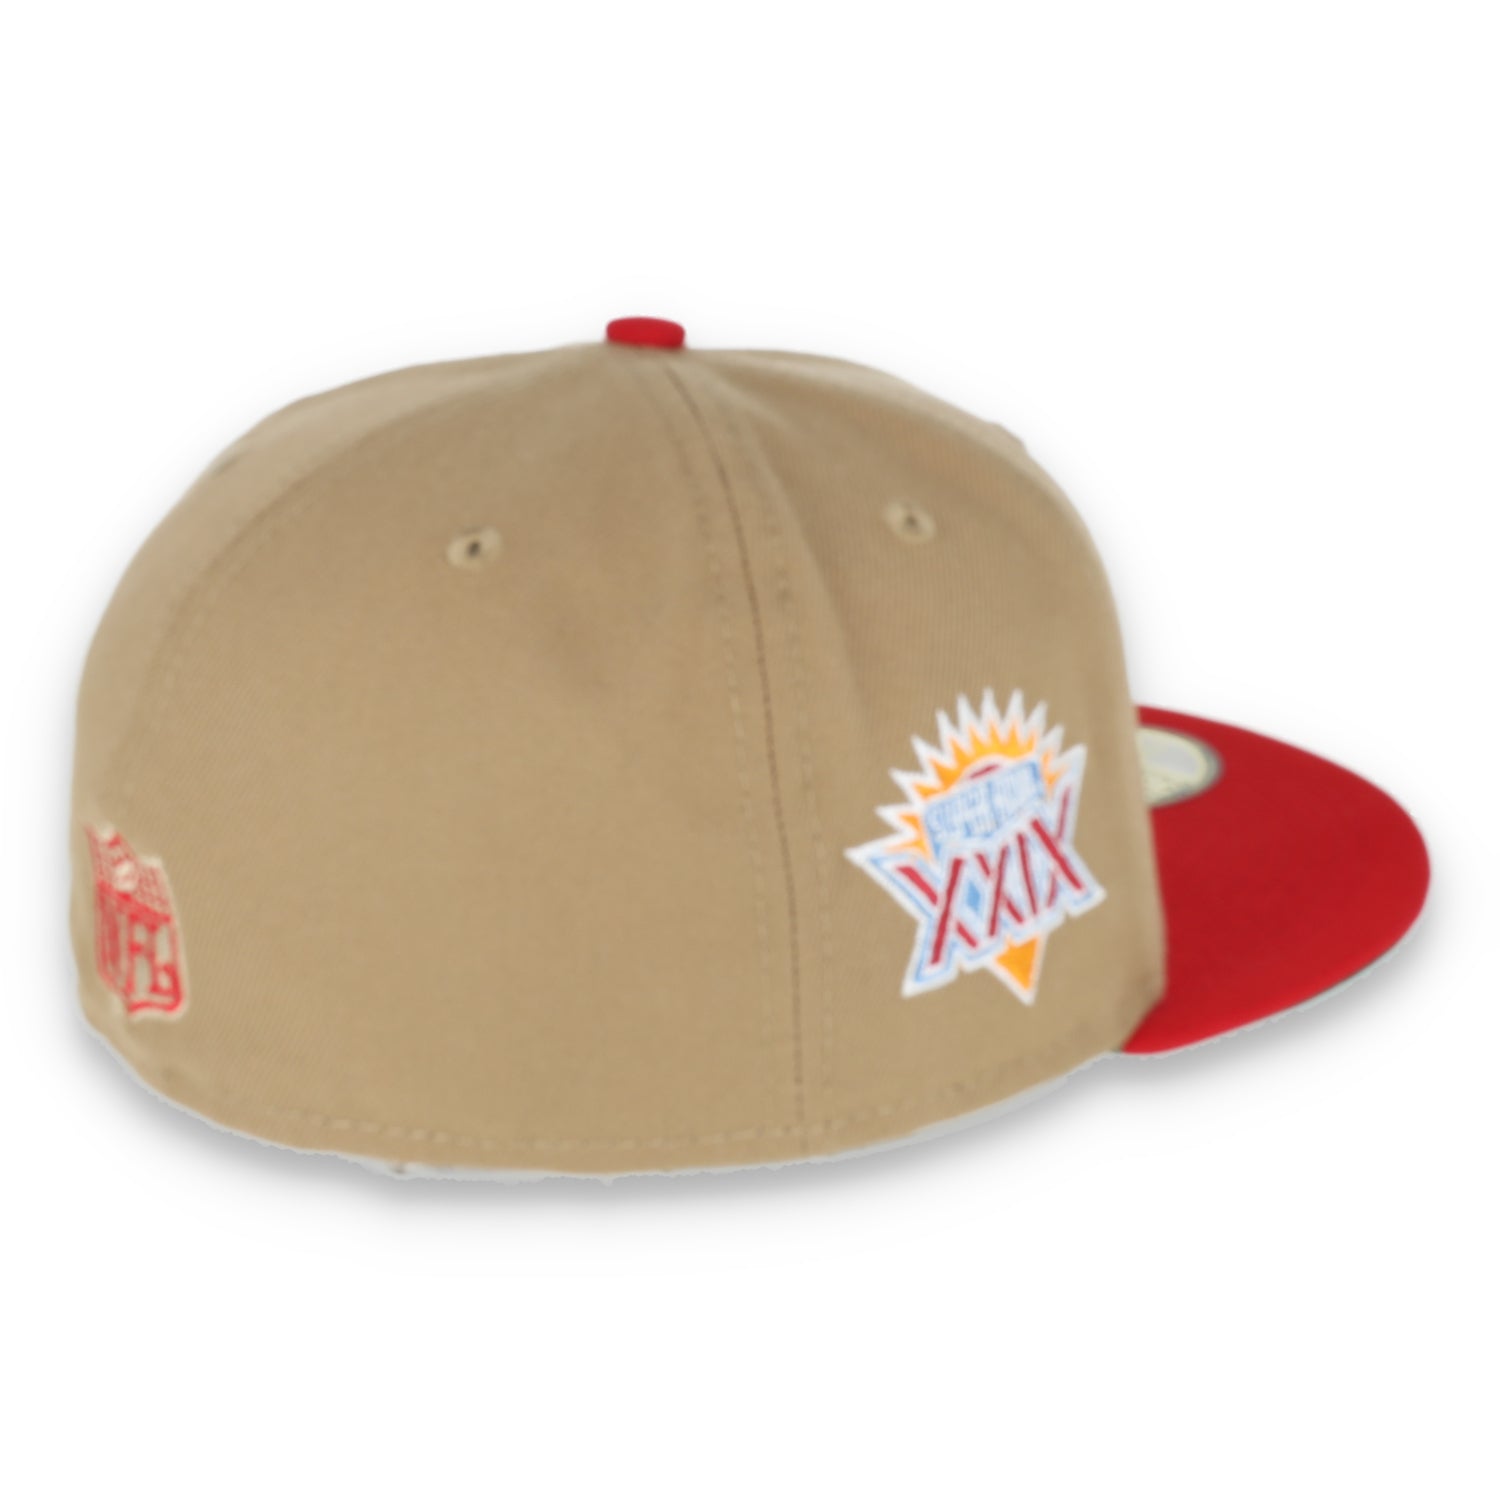 NEW ERA SAN FRANCISCO 49ERS SUPERBOWL XXIX SIDE PATCH 59FIFTY FITTED HAT-KHAKI